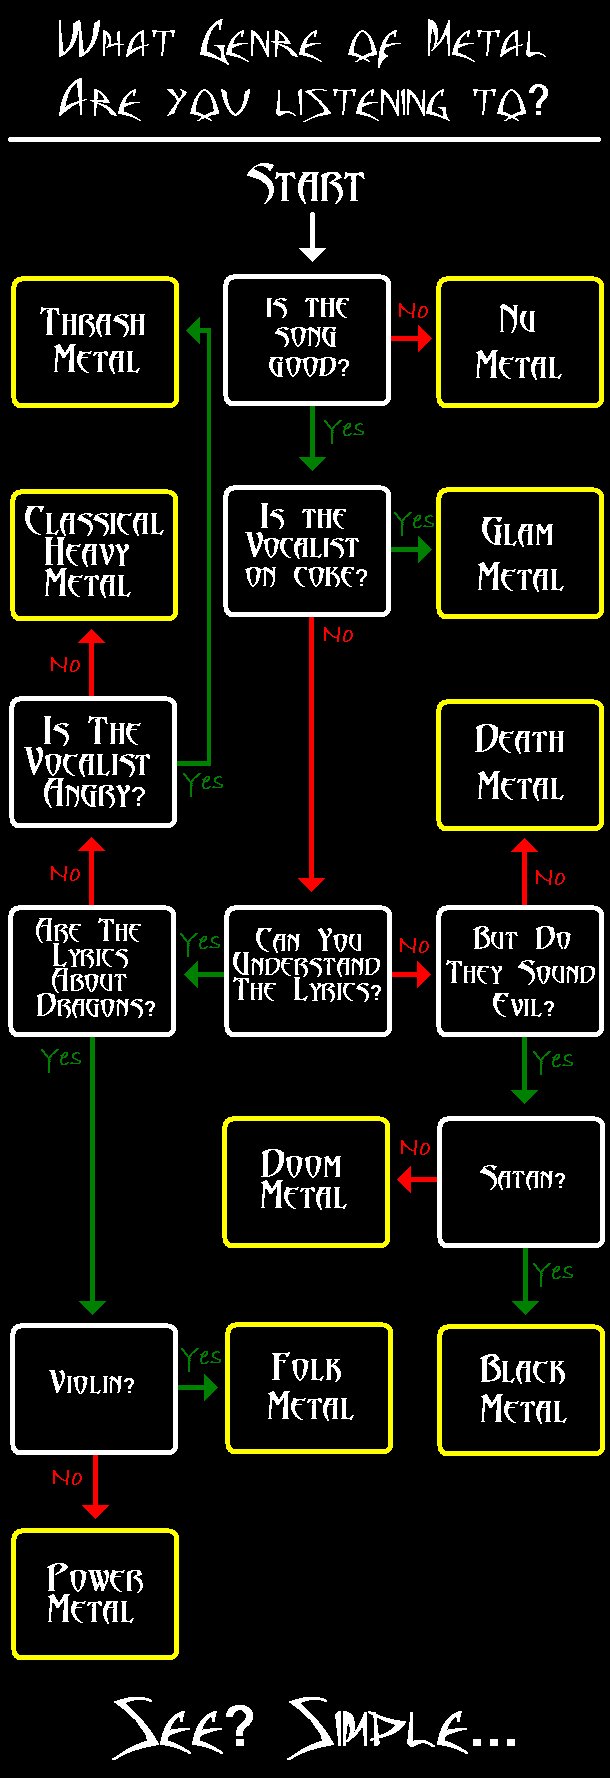 What Genre of Metal Are You Listening To?